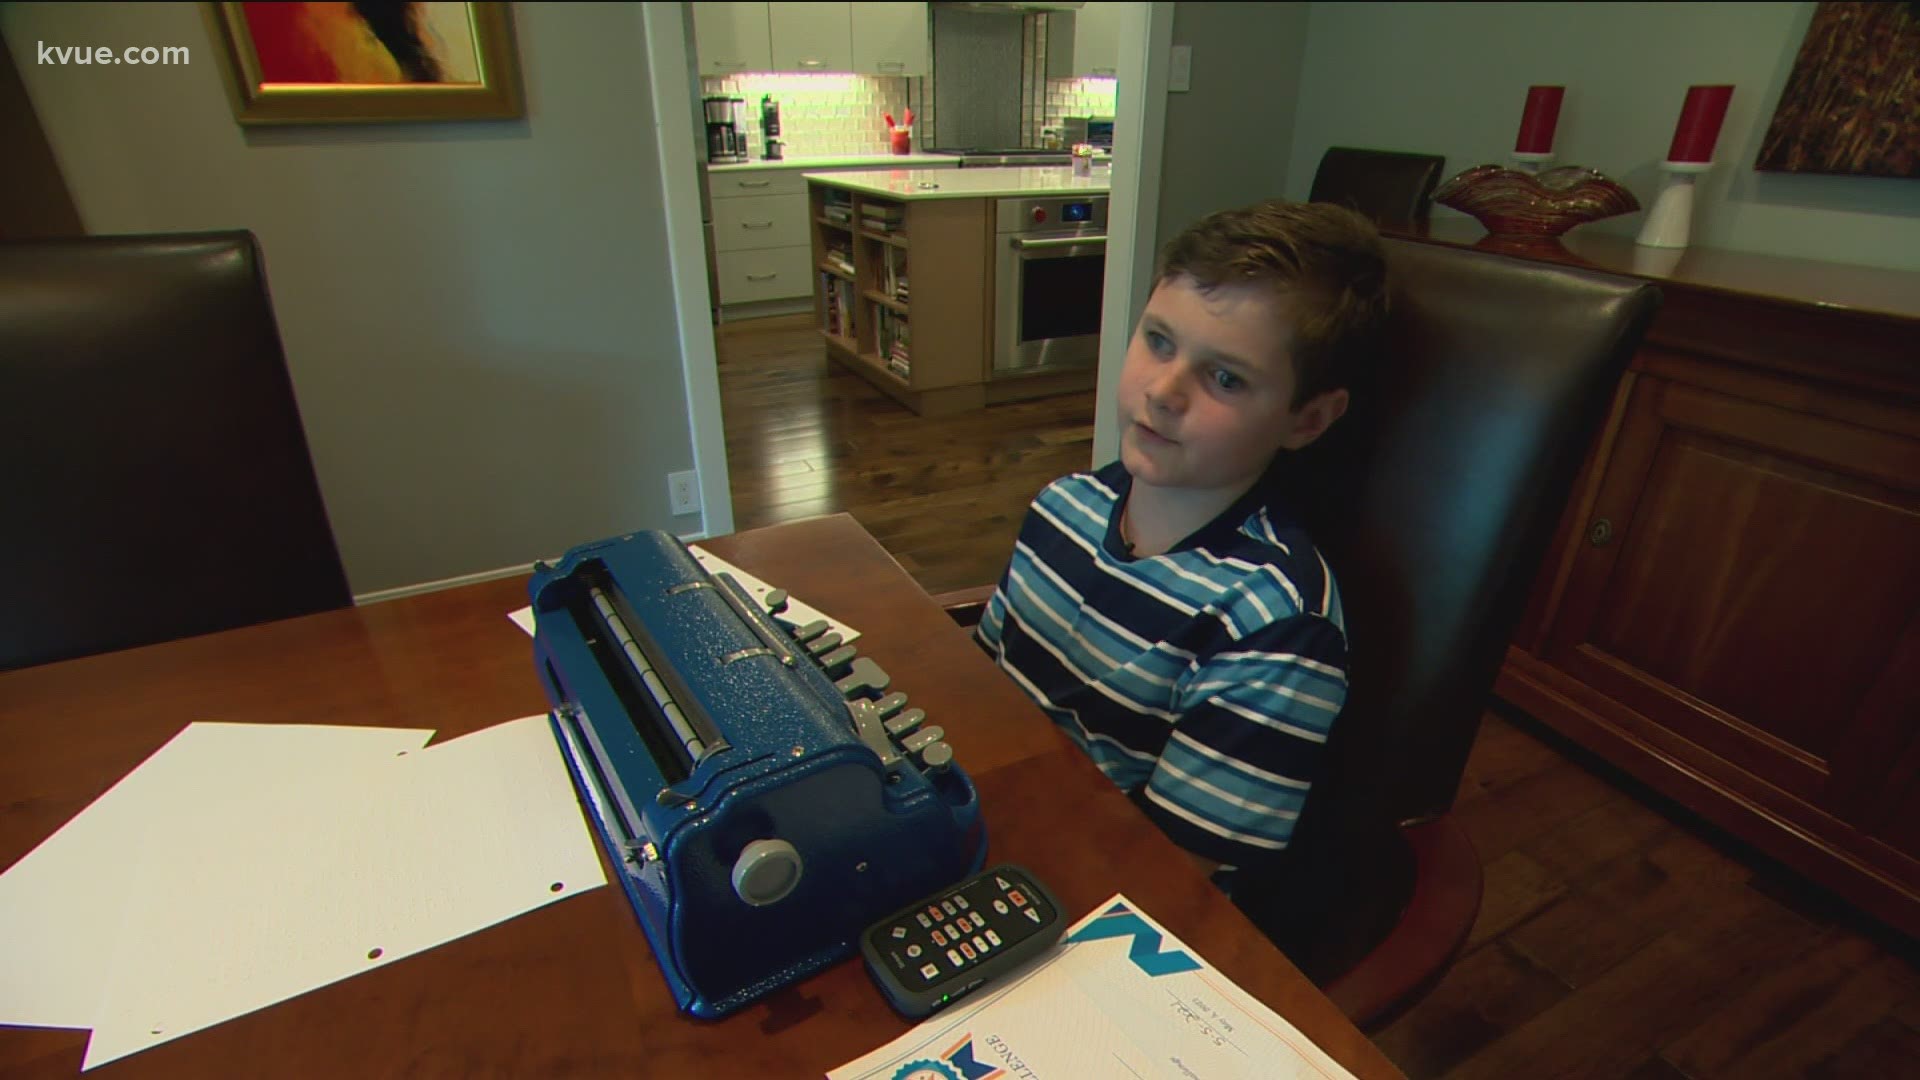 An Austin student is making his mark on an international Braille competition. For Leo, its about celebrating what he's overcome in order to succeed.